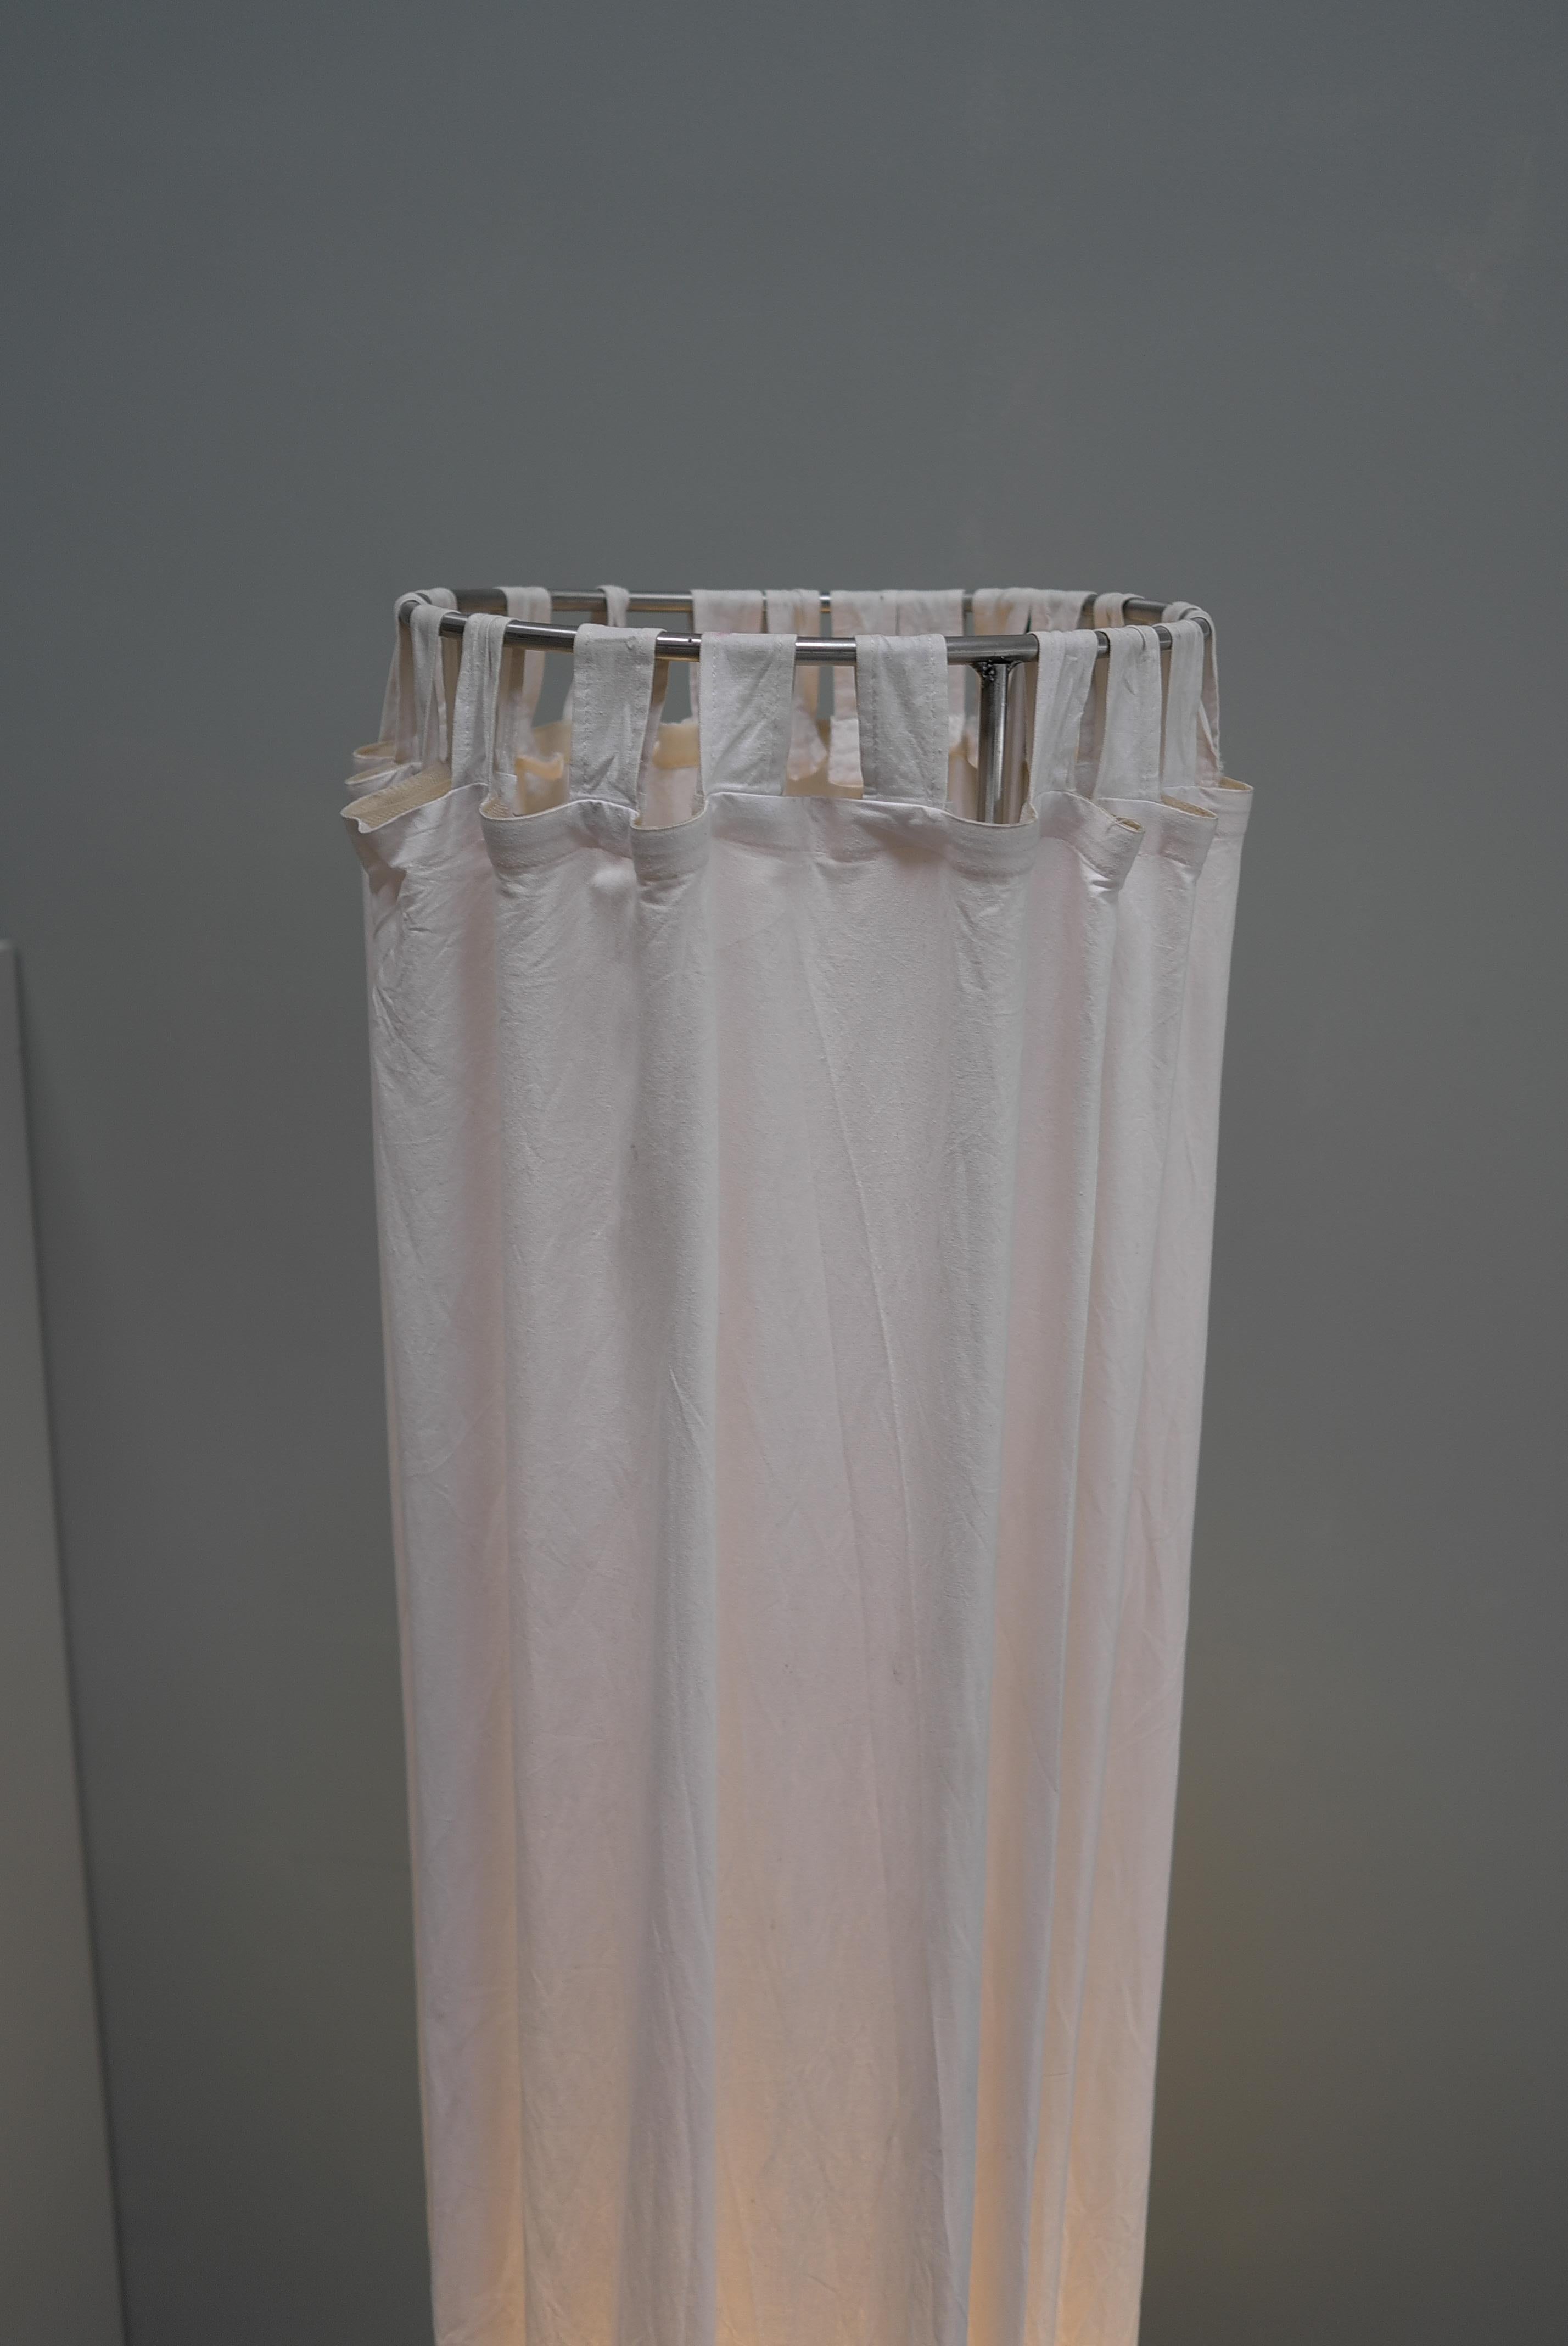 Extra Large White Linen Curtain Floorlamp, The Netherlands 1980's For Sale 1